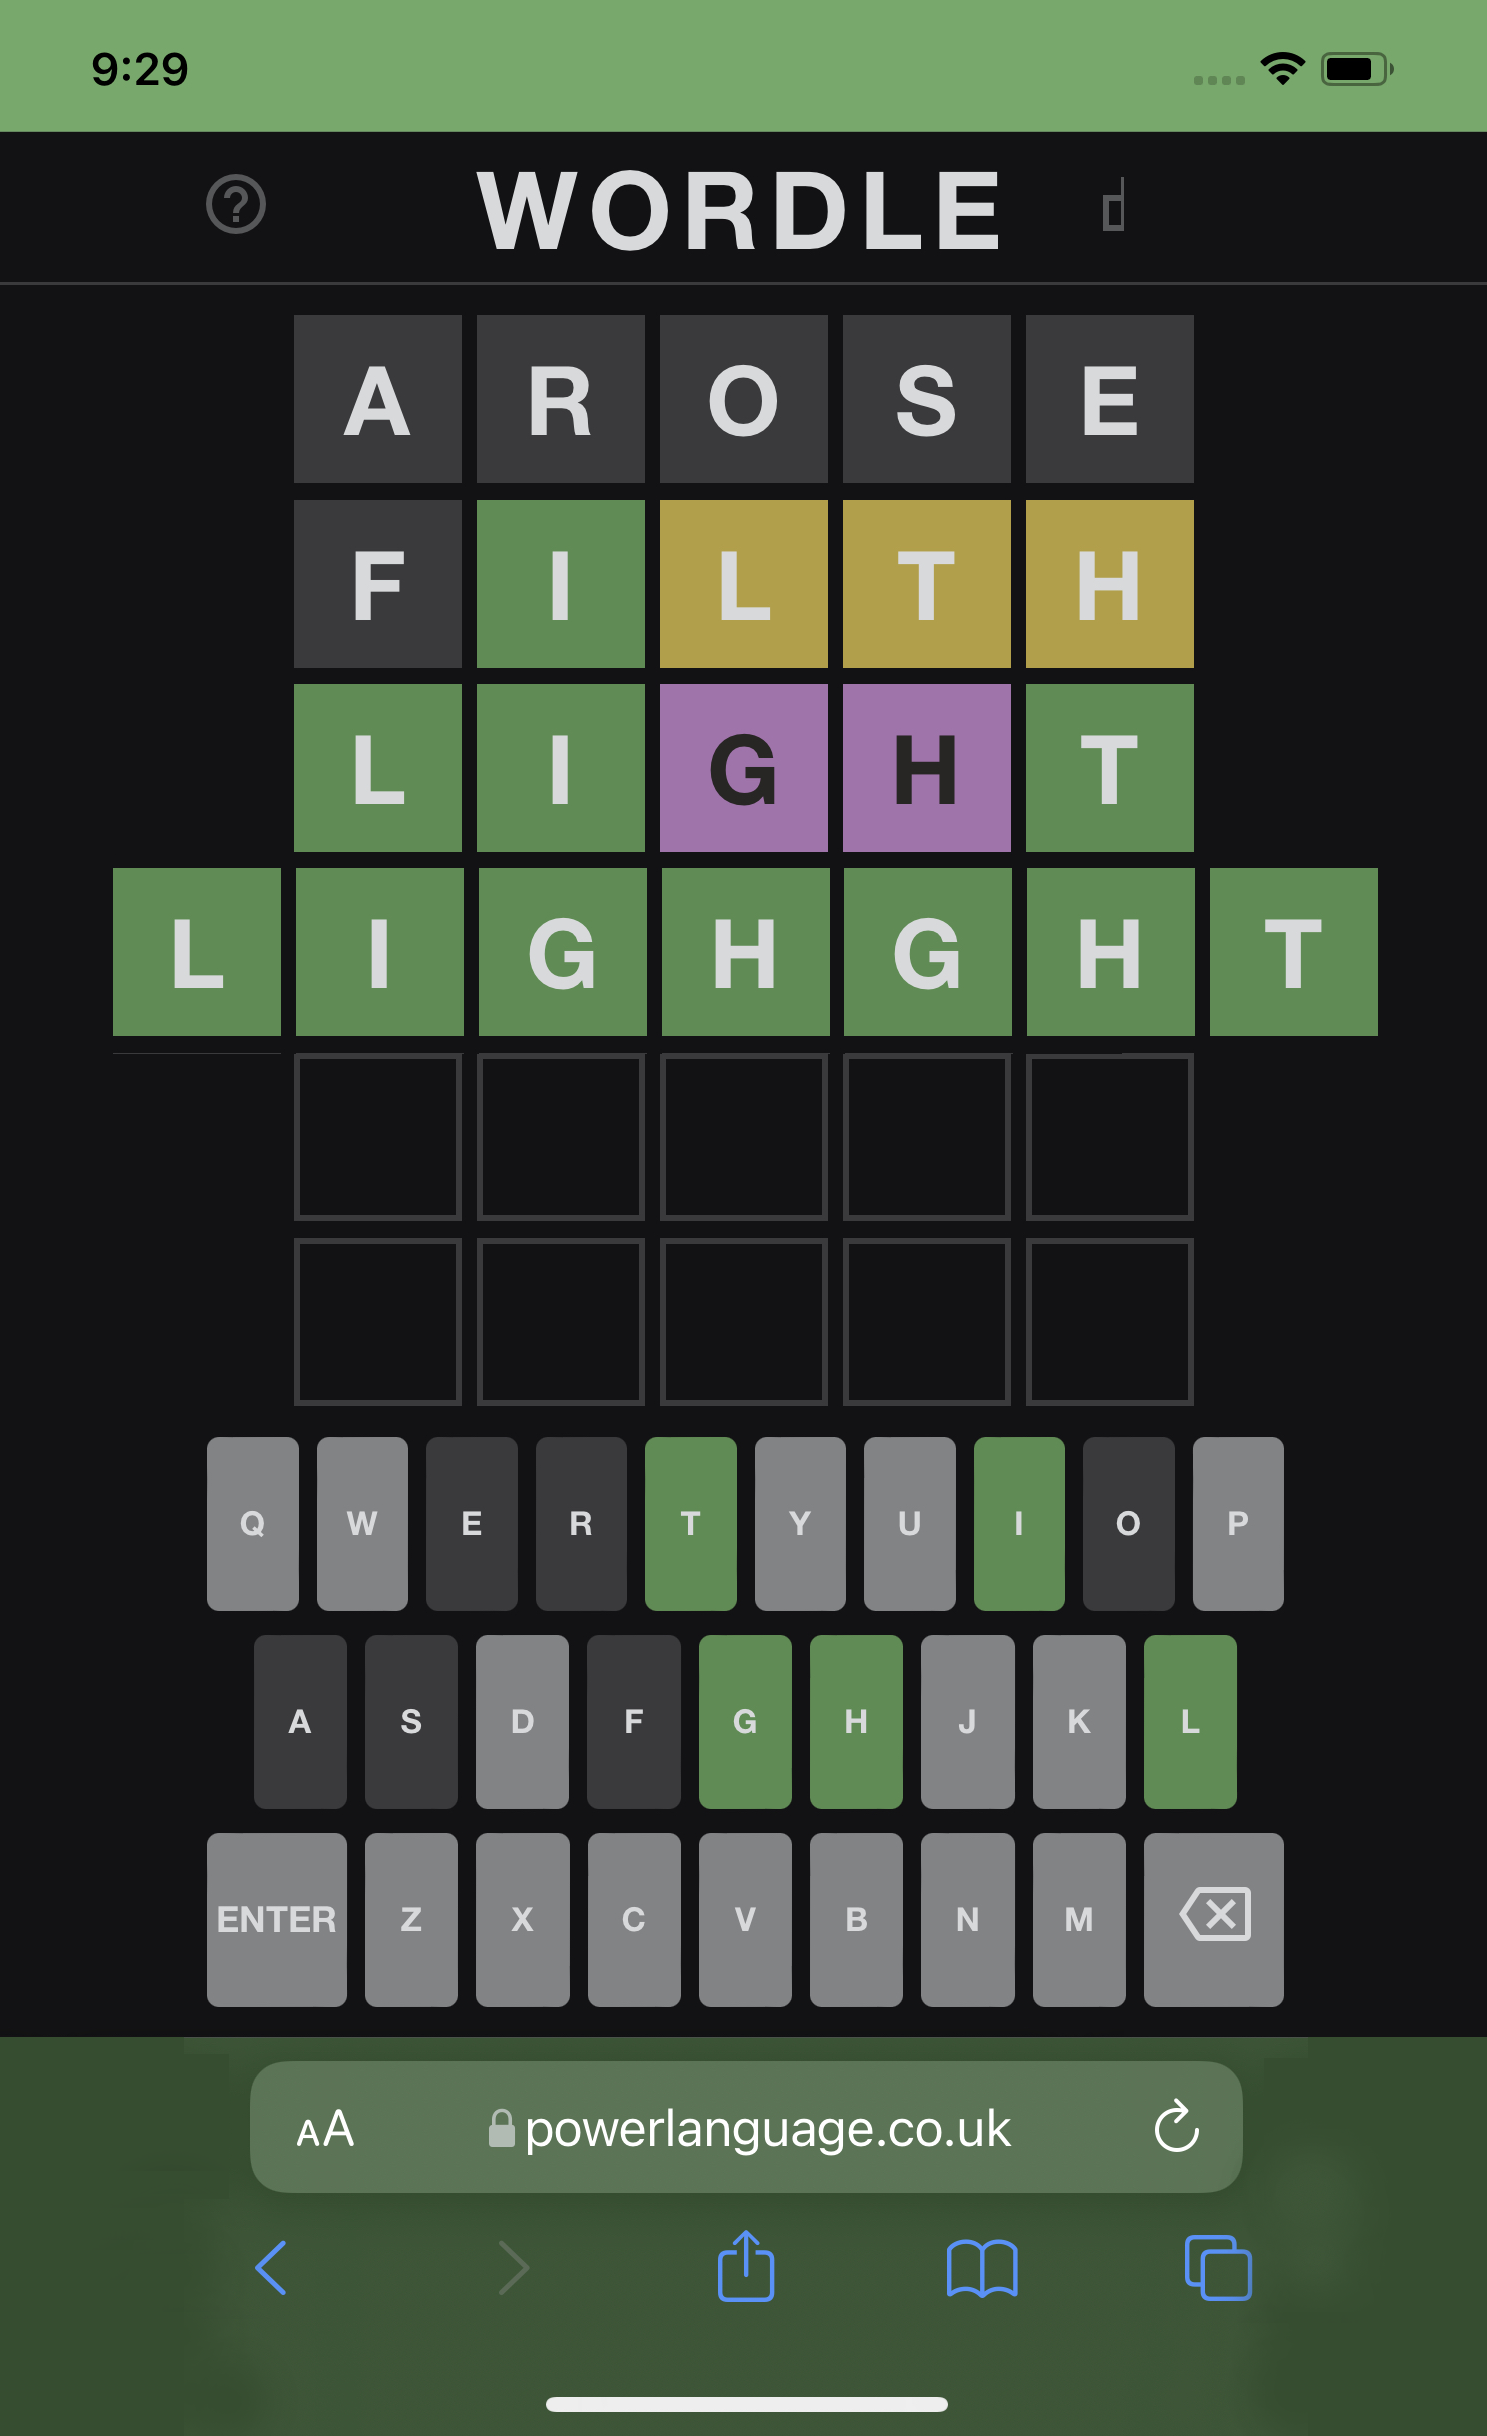 screenshot of Wordle reimagined as a seven letter game for the inclusion of lighght